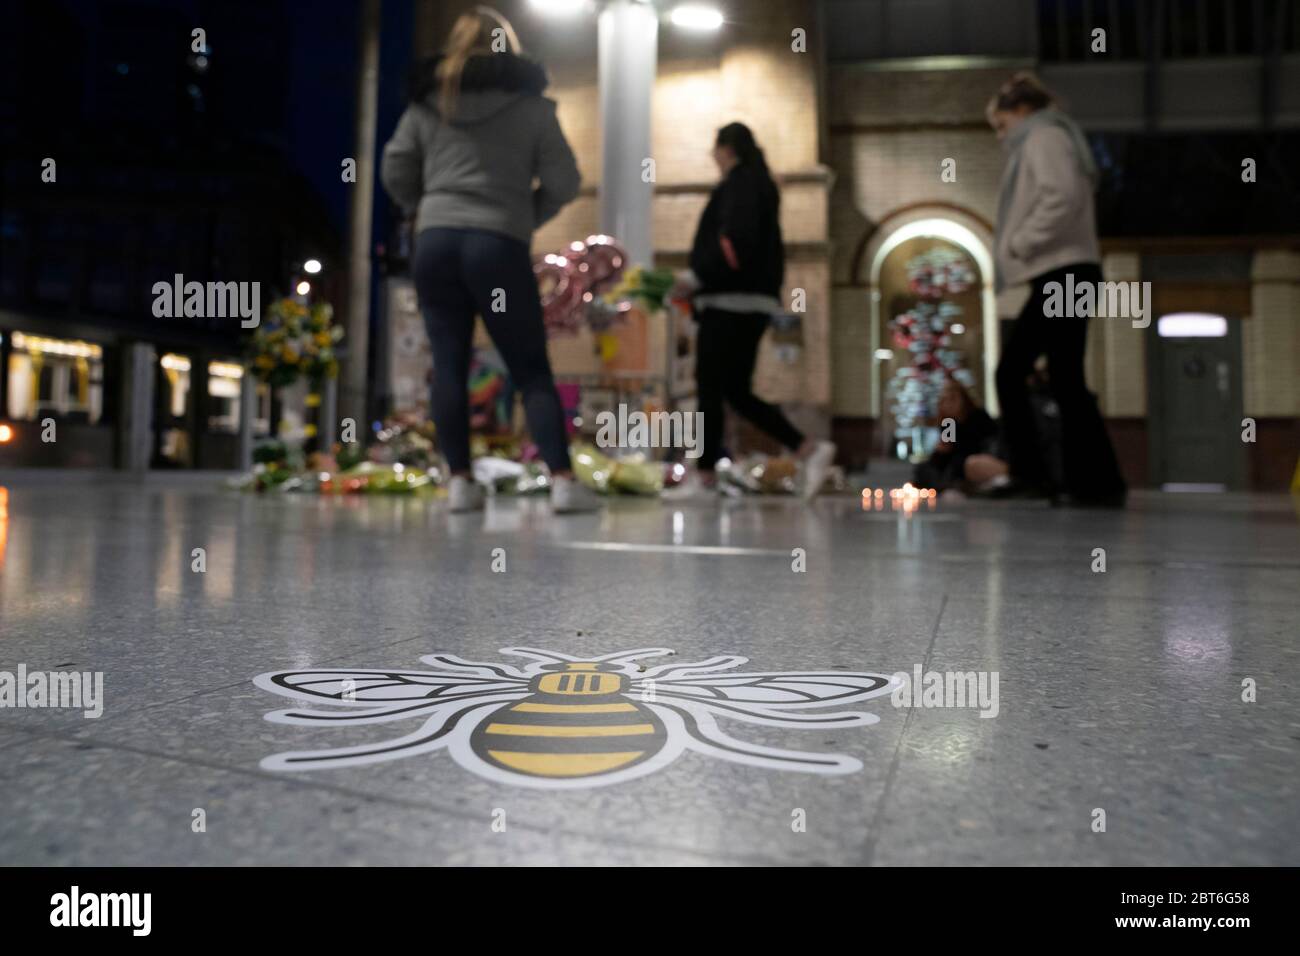 Manchester, UK. 22nd May, 2020. A Manchester bee symbol placed on the ground to encourage social distancing is seen as members of the public stand by a memorial to the victims of the Manchester Arena Bomb at Manchester Victoria Railway Station as the 3rd Anniversary of the terror attack is marked with a minuteÕs silence, Manchester, UK. Credit: Jon Super/Alamy Live News. Stock Photo